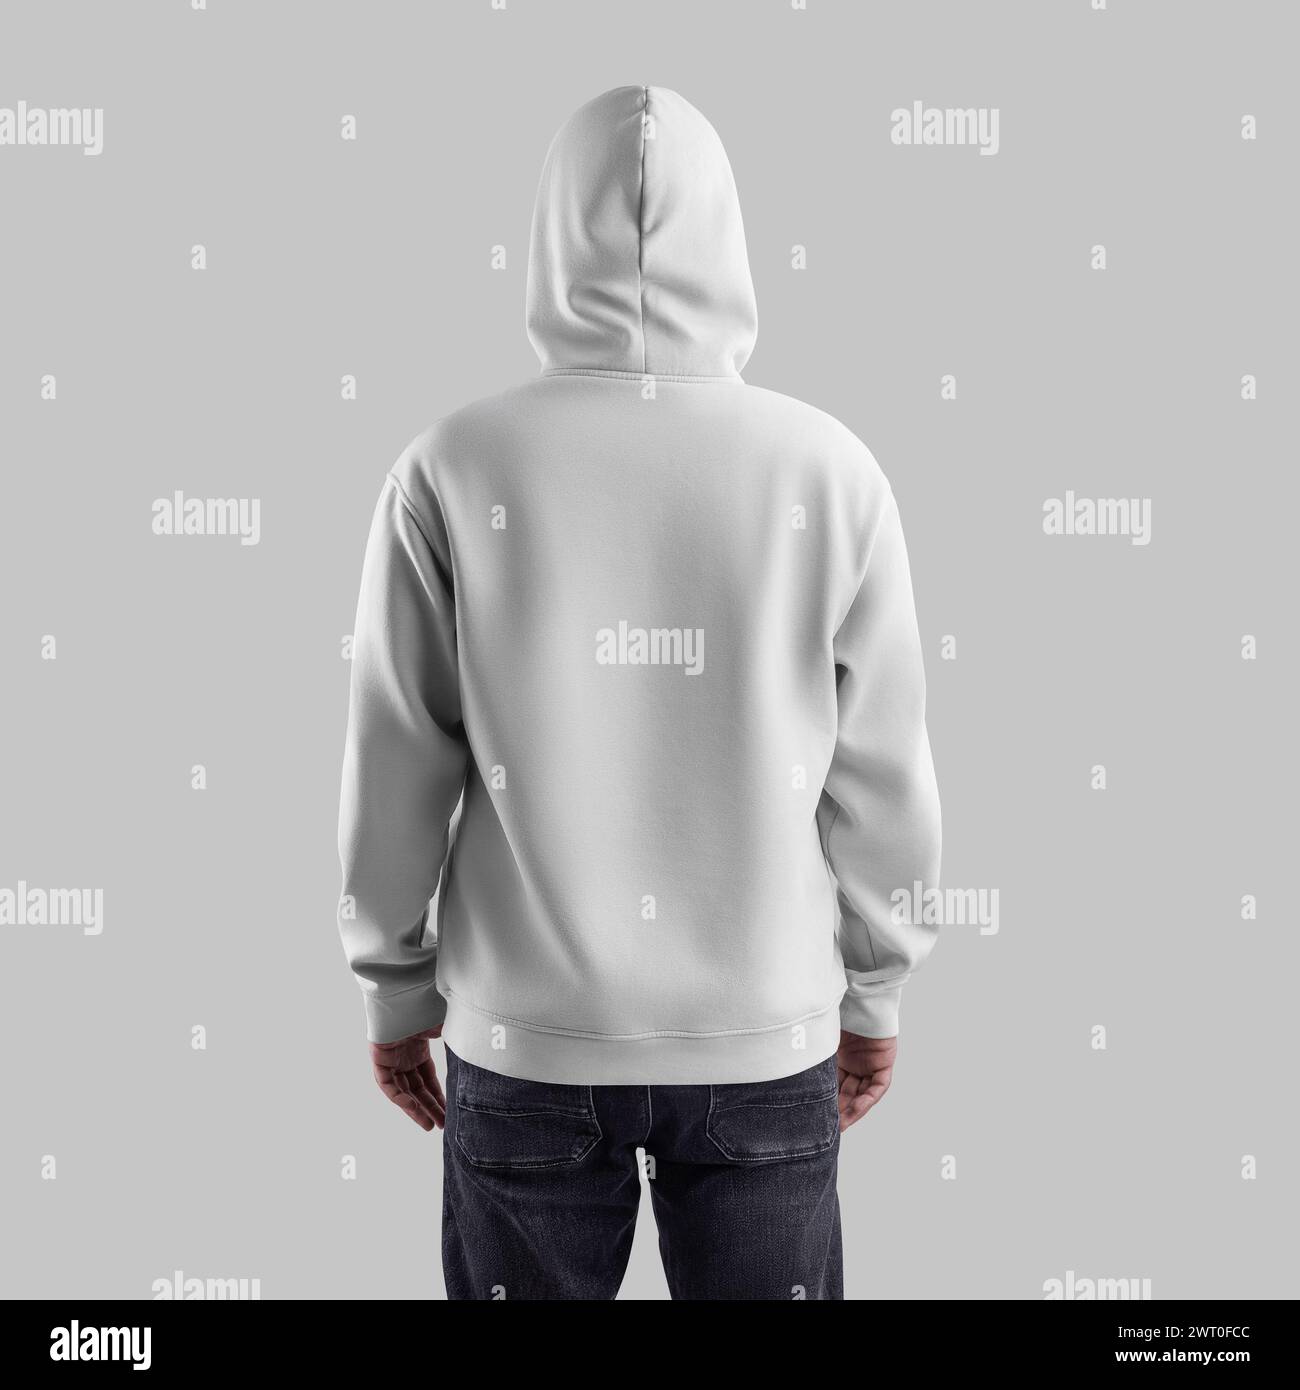 Template white hoodie oversize on a man in a hood, in dark jeans, back view. Male sweatshirt mockup isolated on background. Fashionable clothing with Stock Photo